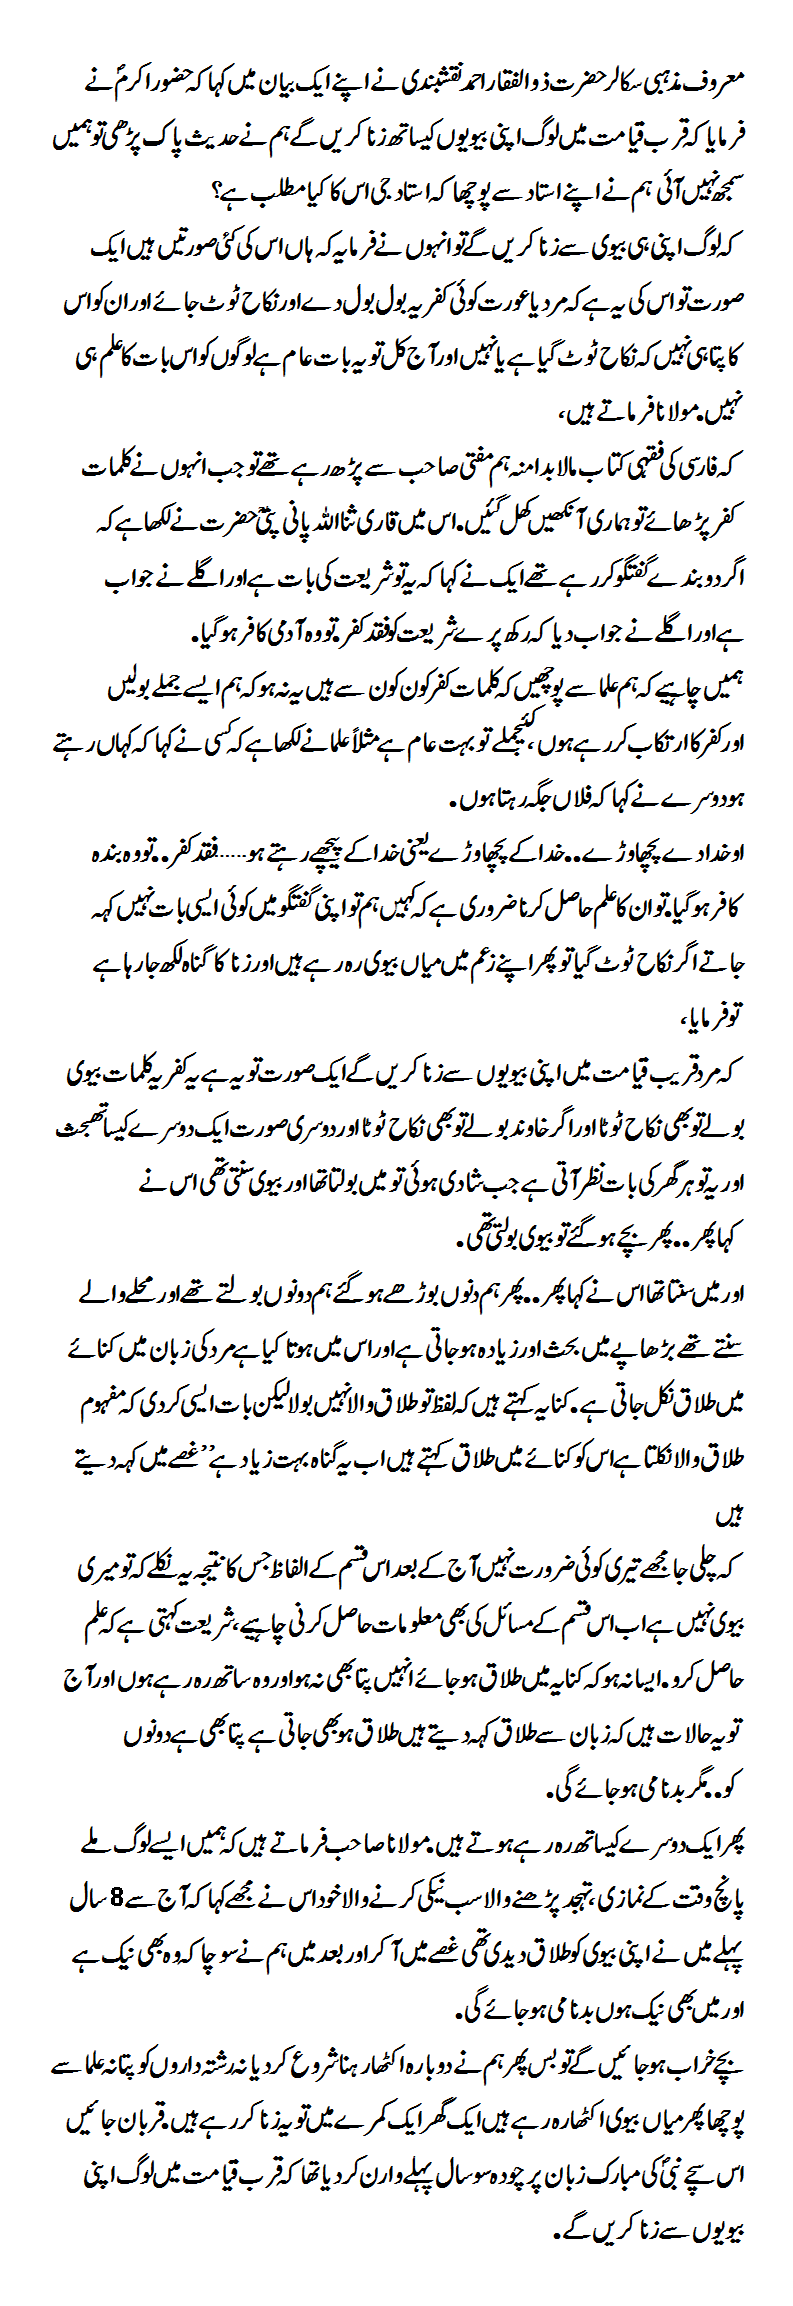 The Holy Prophet said in the near future In Urdu